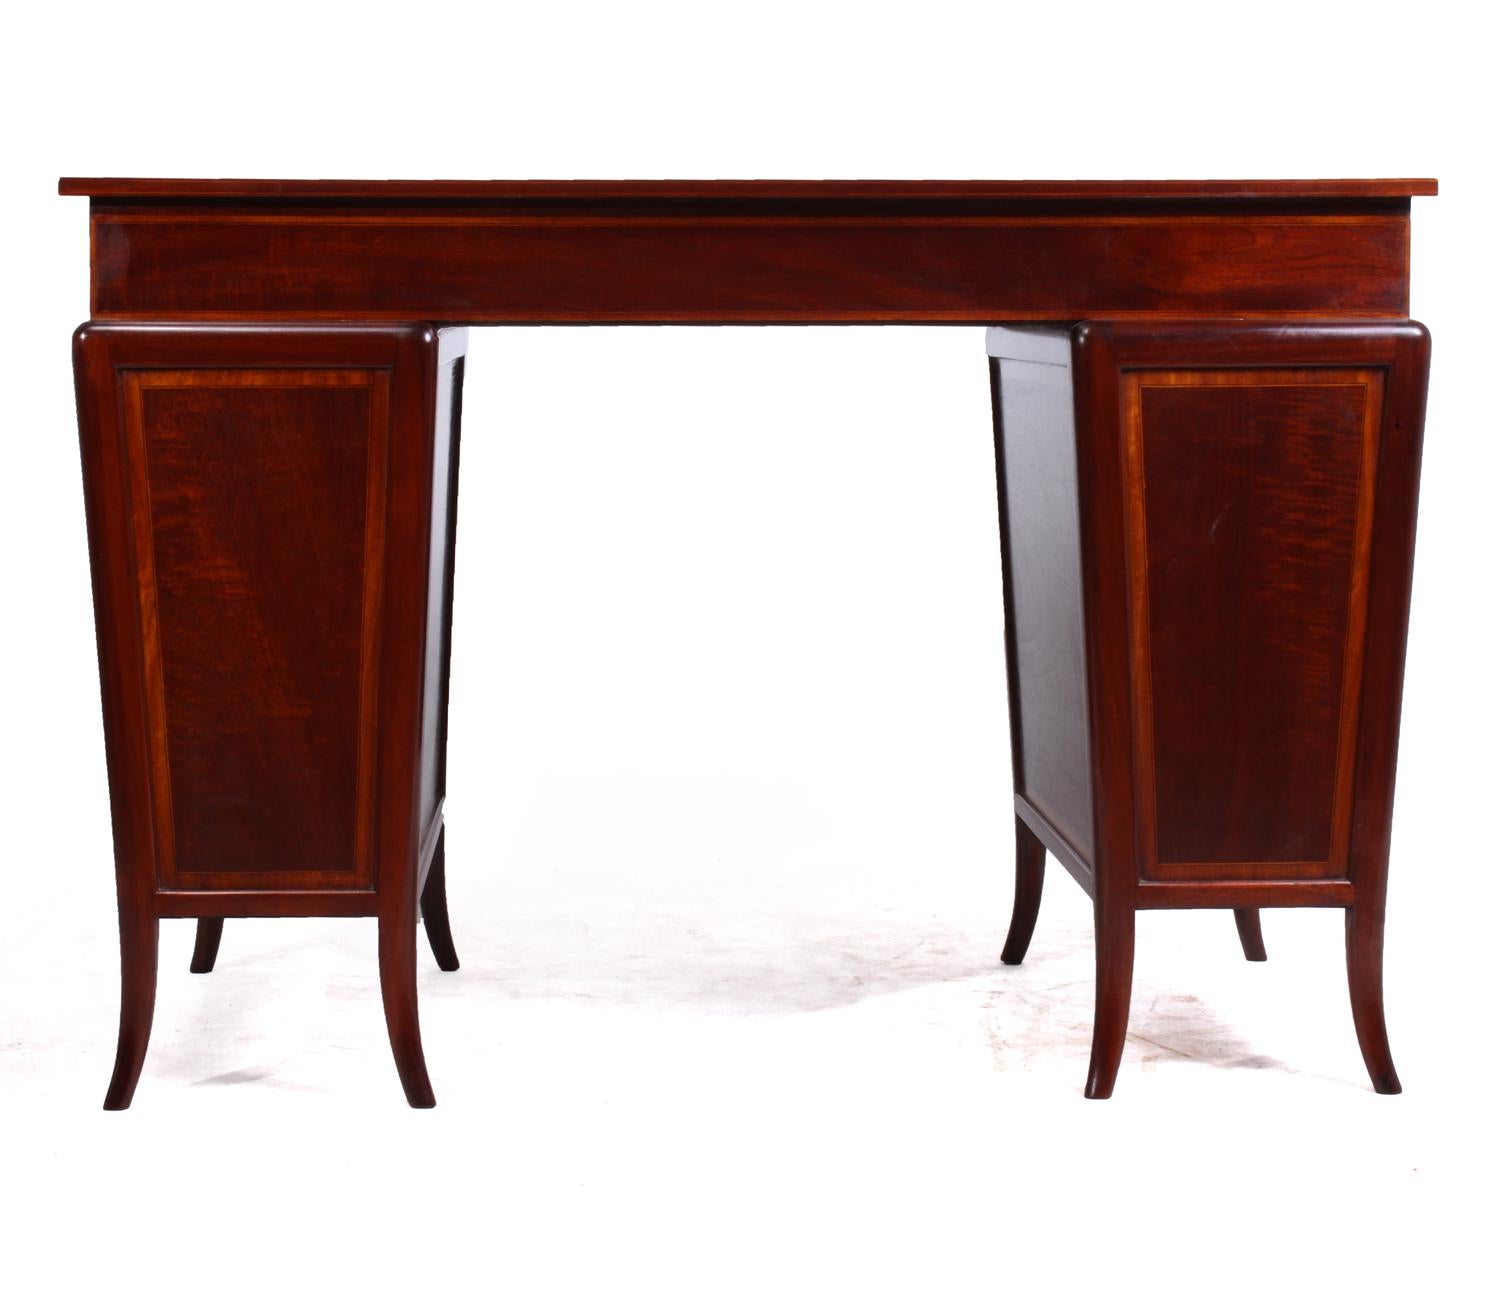 British Antique Ladies Writing Desk by Edwards and Roberts, circa 1900 For Sale